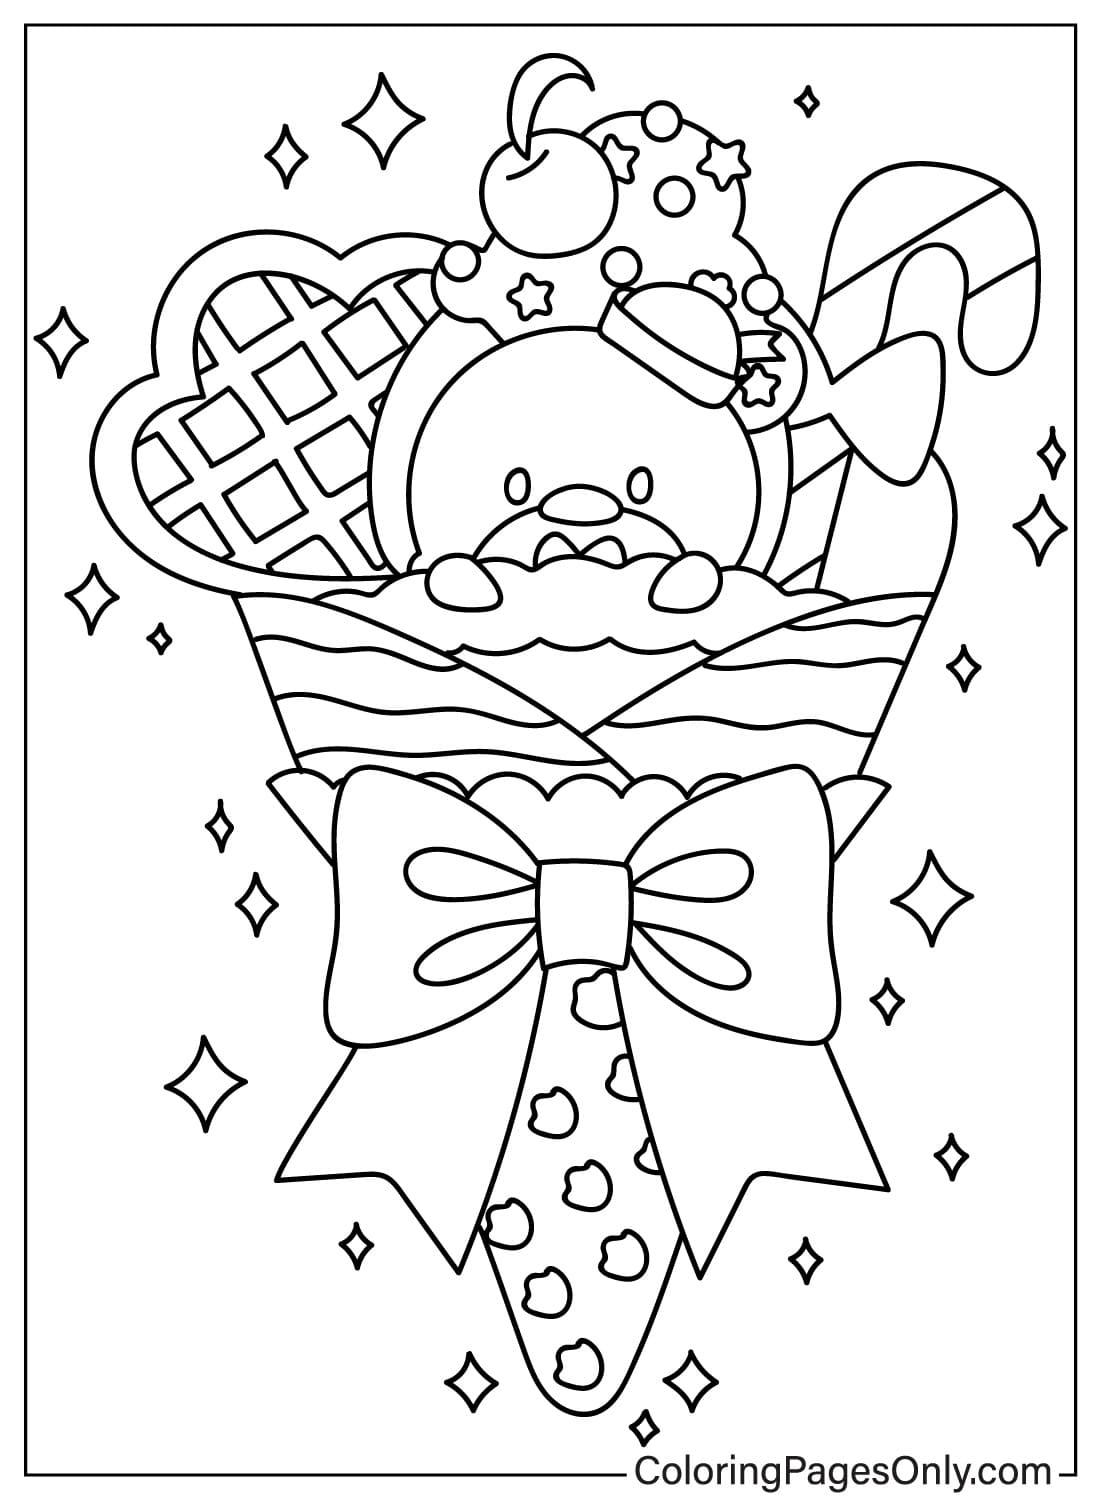 Tuxedo Sam Free Coloring Page